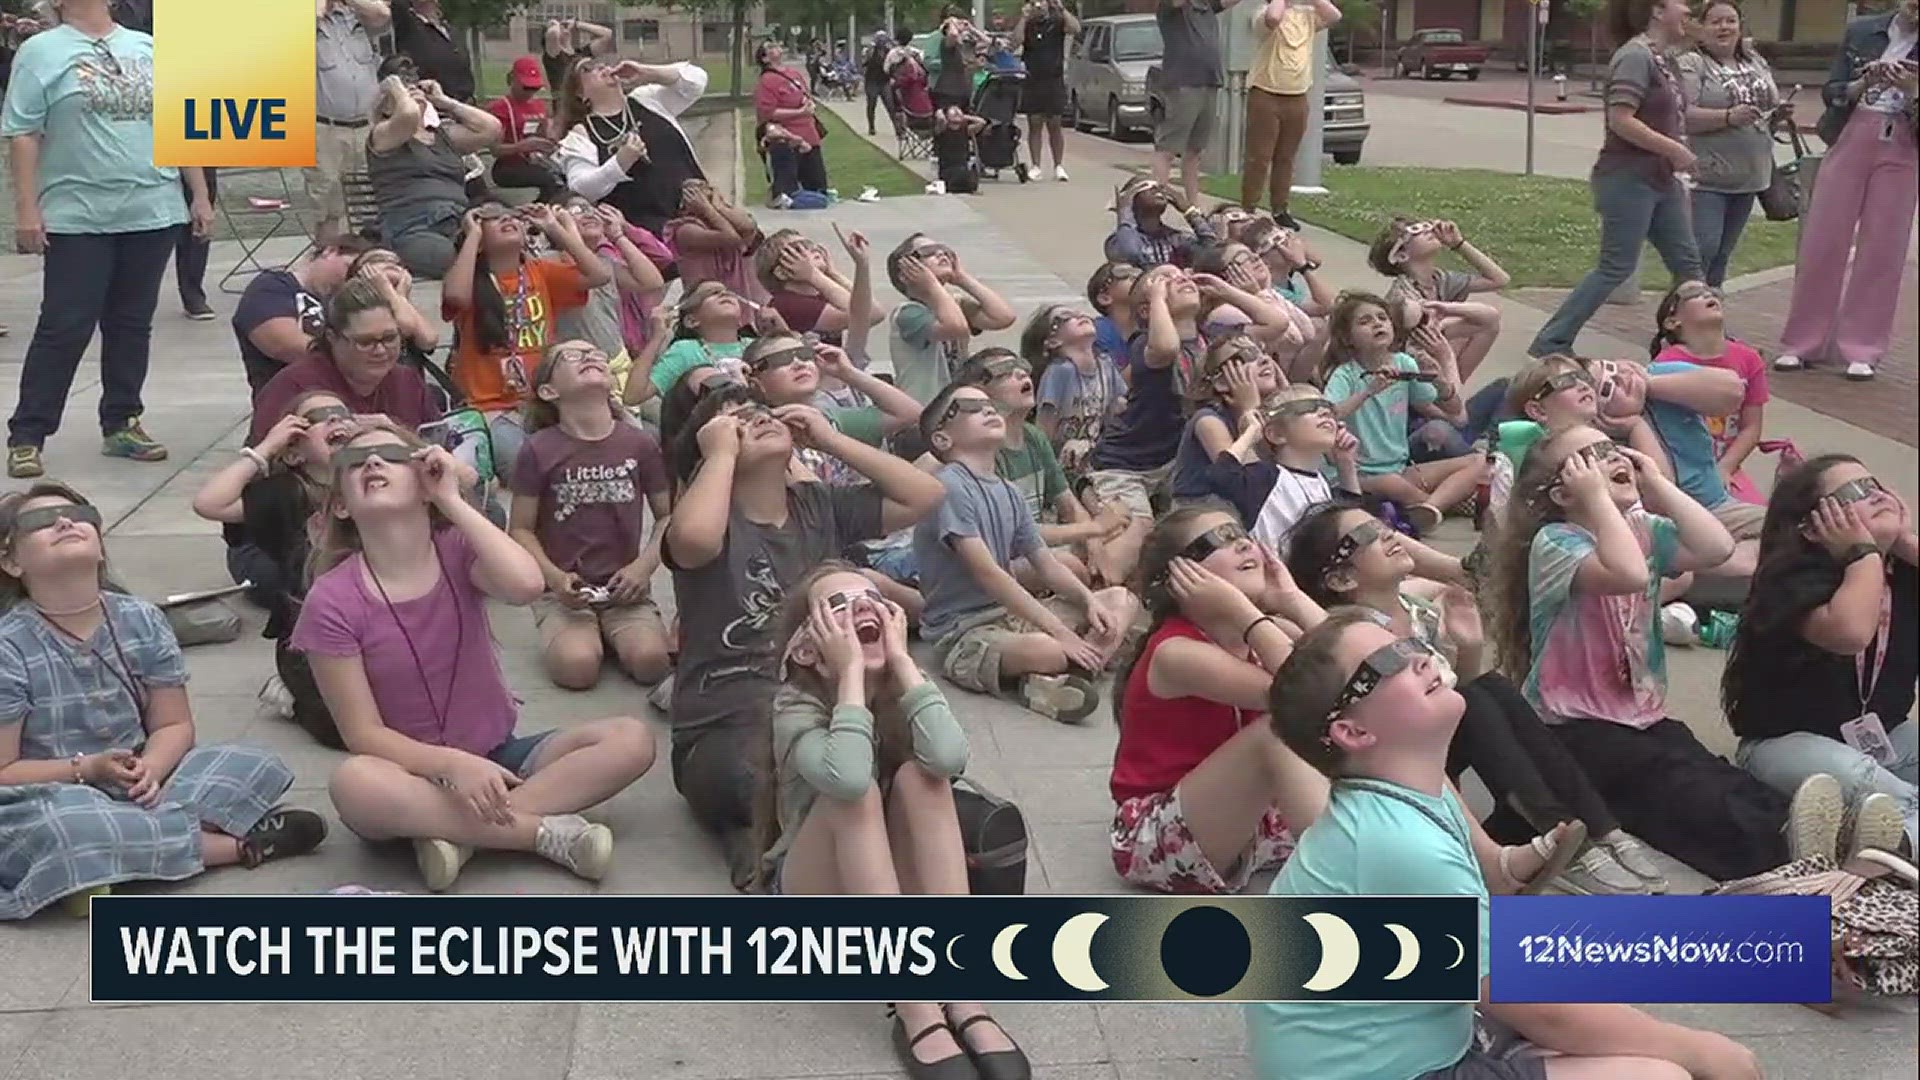 FULL SHOW: Determined Southeast Texas eclipse watchers were able to enjoy Monday's solar eclipse by catching glimpses between the cloud cover from downtown Beaumont.